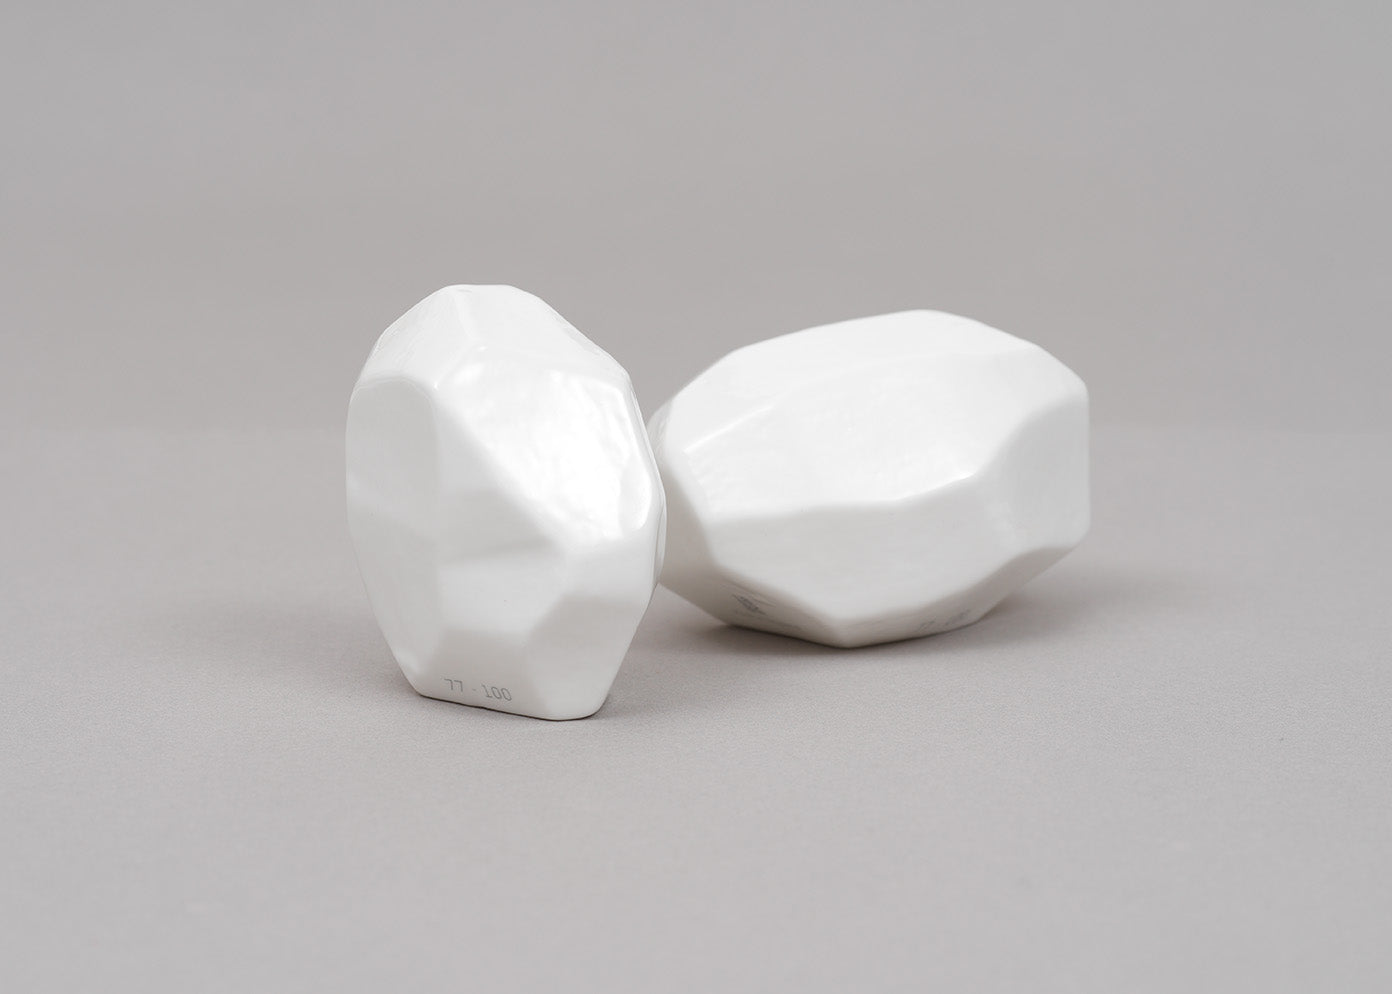 Bruce McLean, ‘Two carefully peeled potatoes in porcelain’, 2020